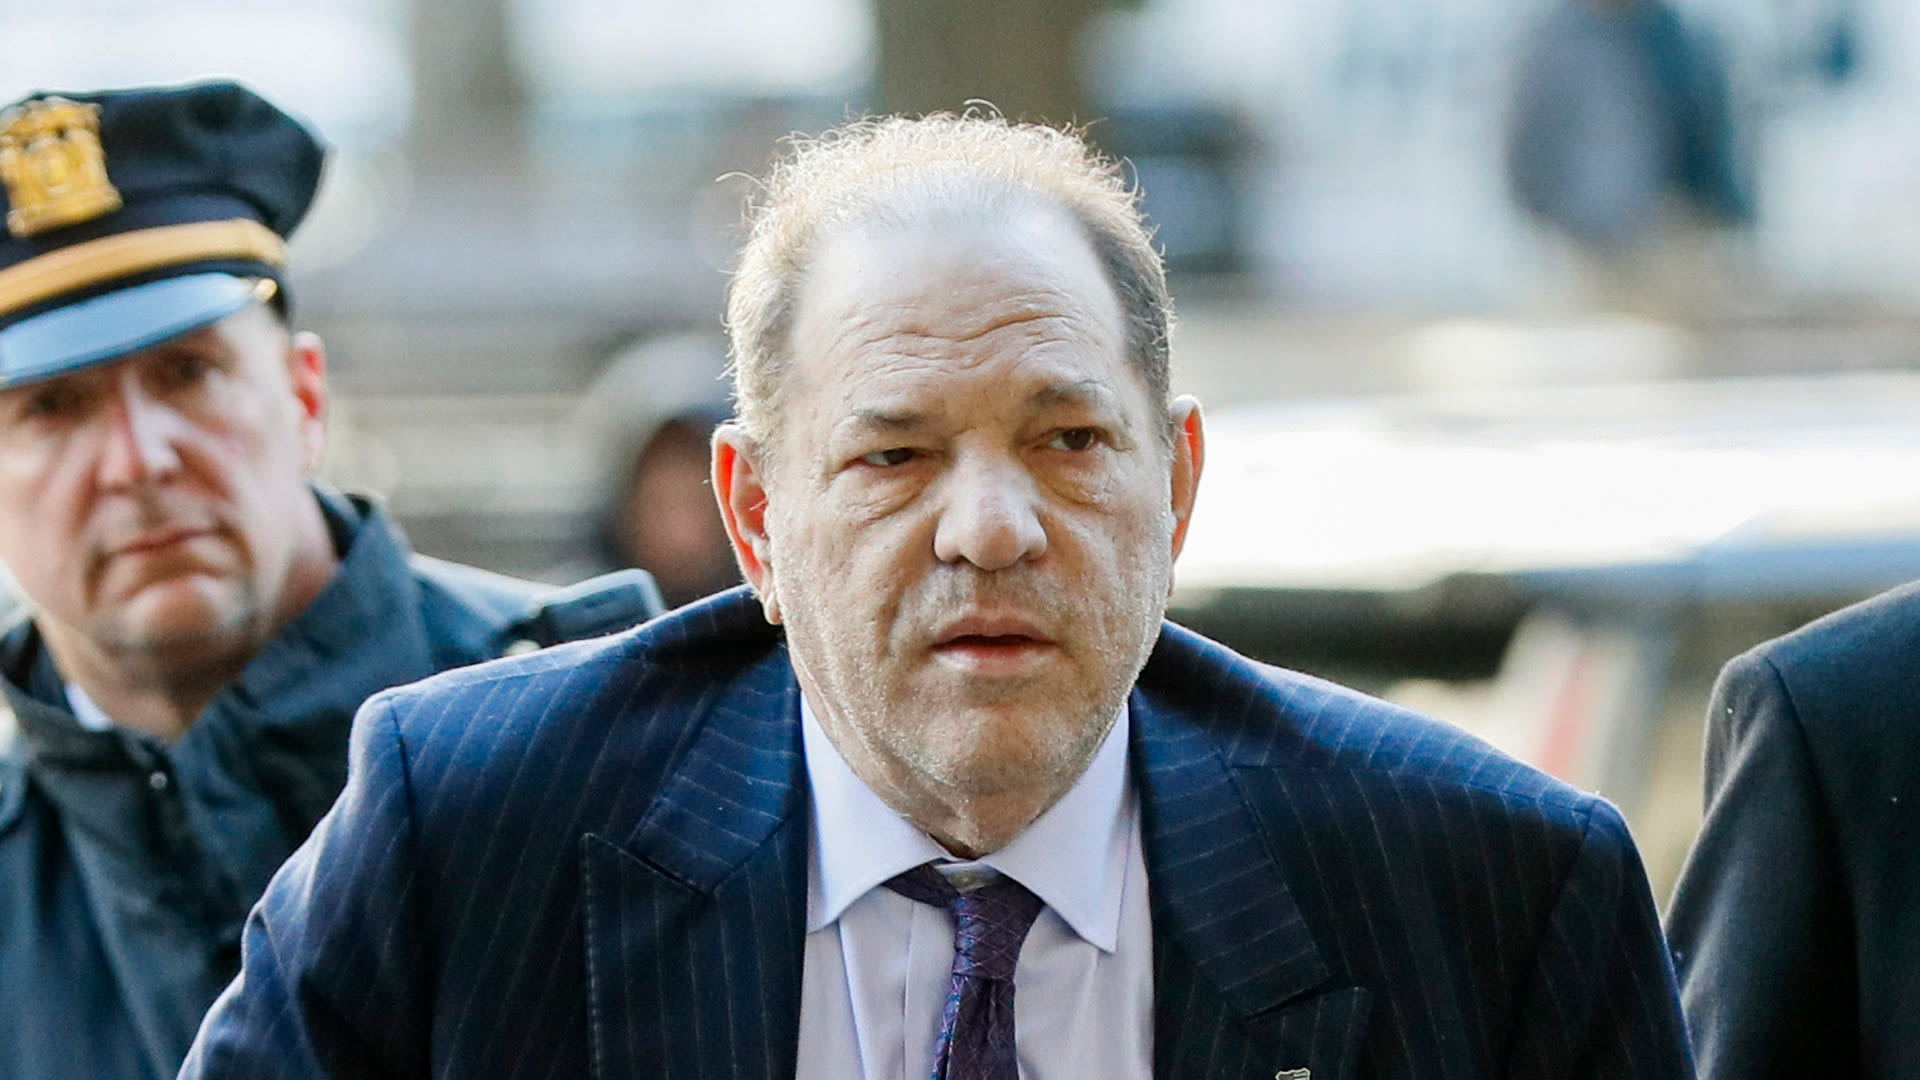 Harvey Weinstein accuser's lawyer says she'd consider testifying at second trial